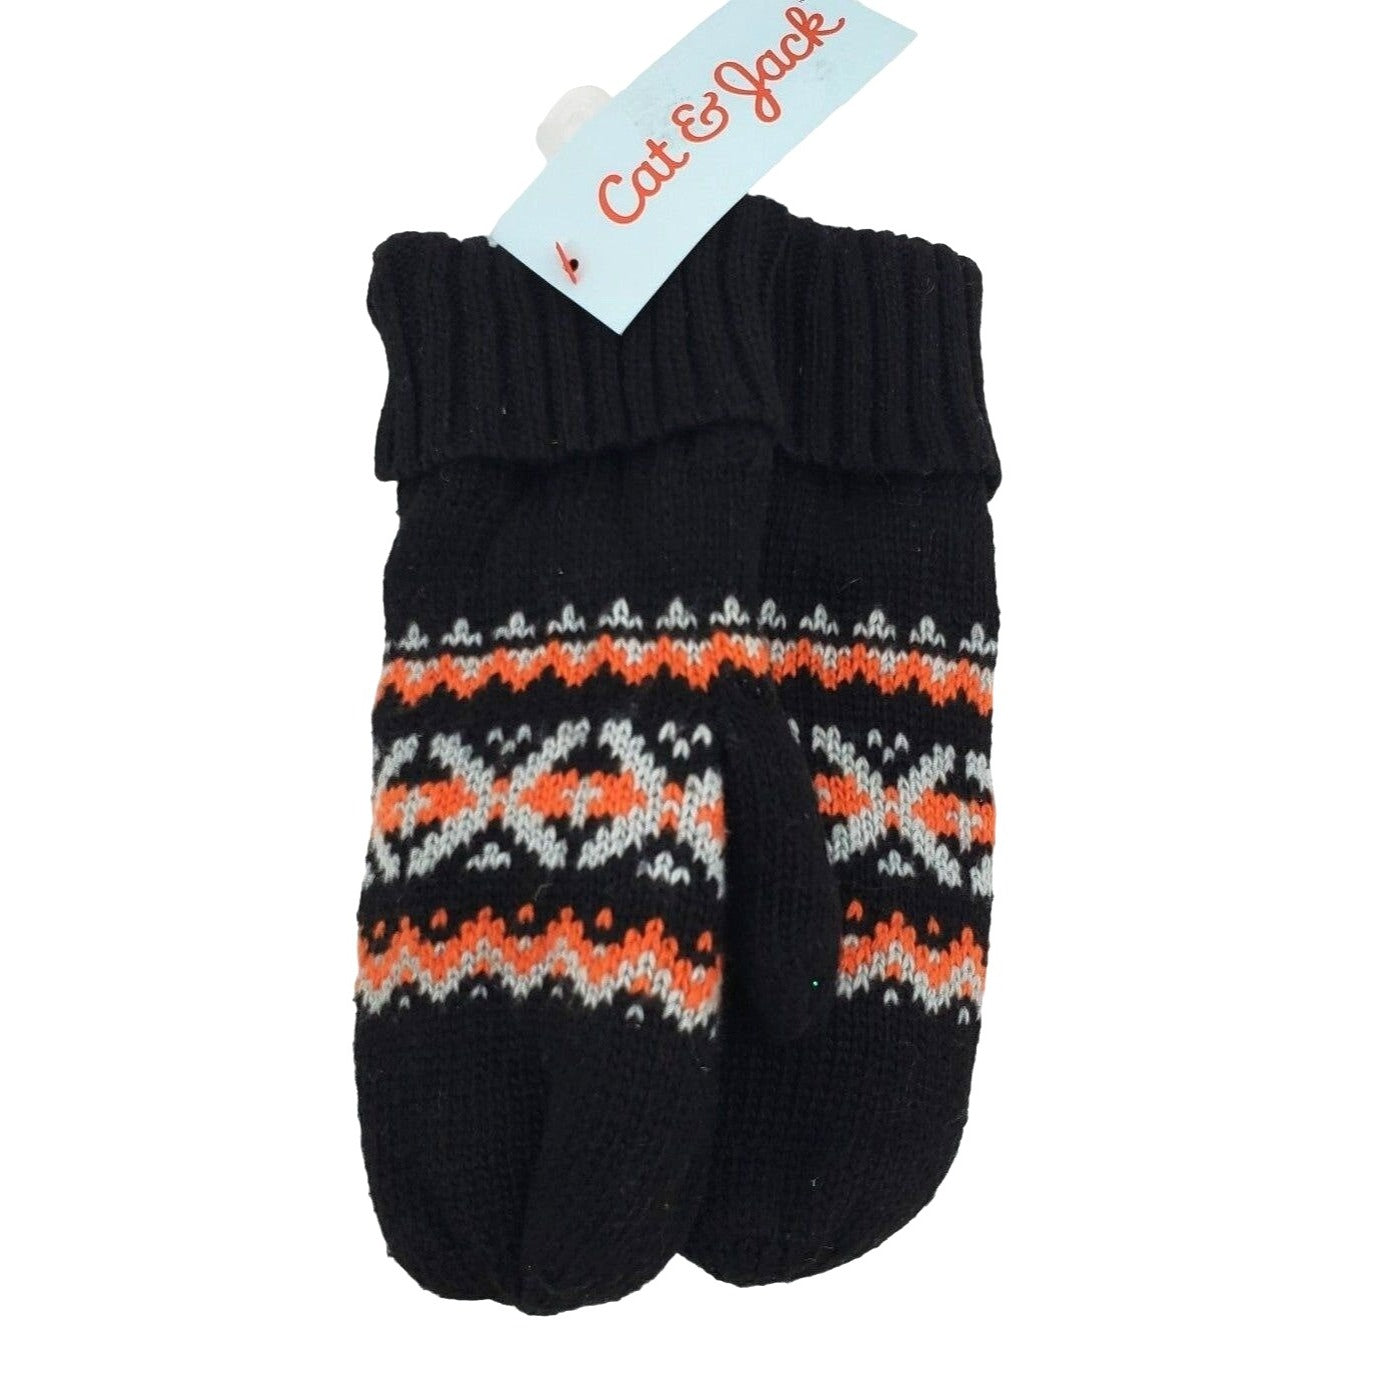 CAT & JACK Girls knit Mittens Double-layer Winter gloves Fair Isle